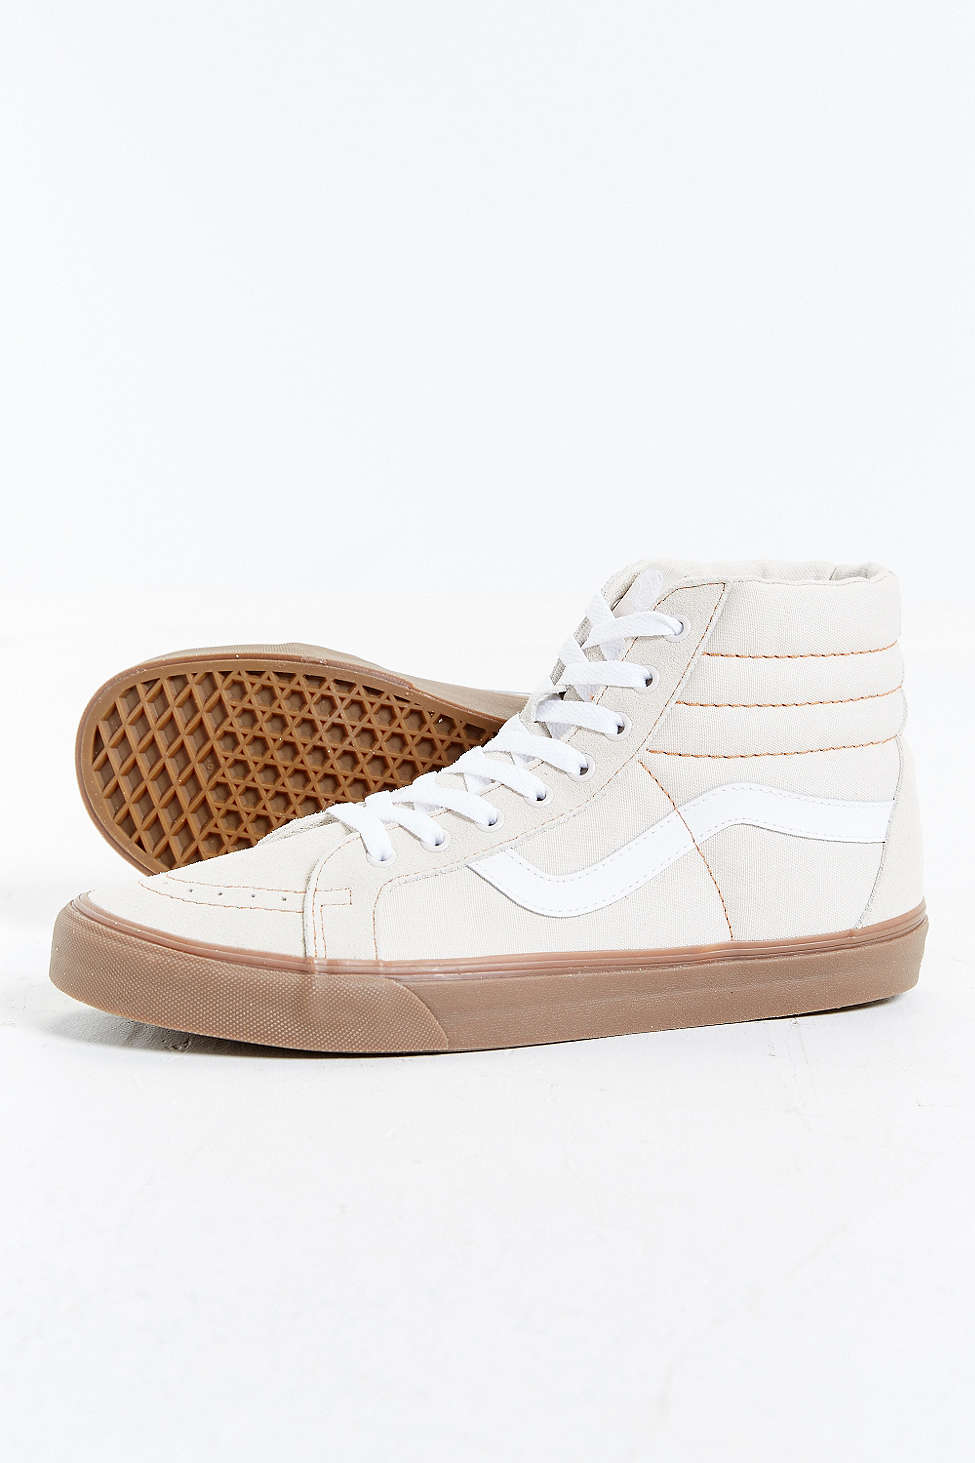 x Urban Outfitters – Sk8-Hi Reissue (Available Now) - Under The Palms